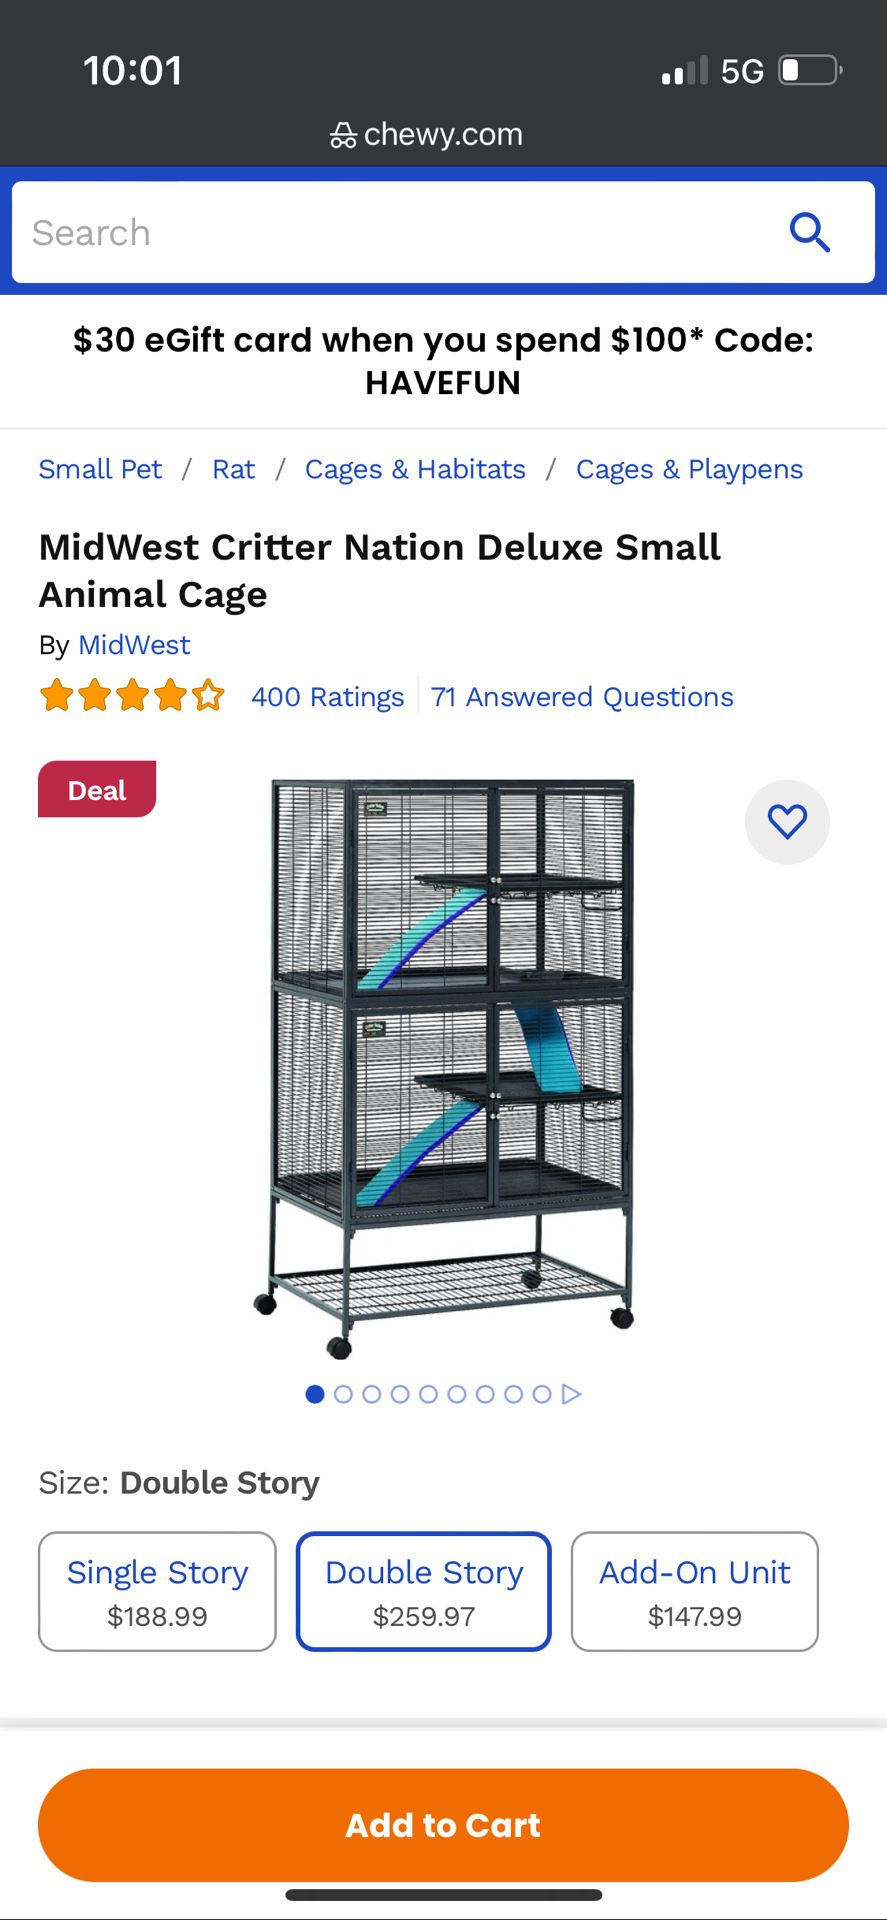 Two-Story Critter Nation Cage